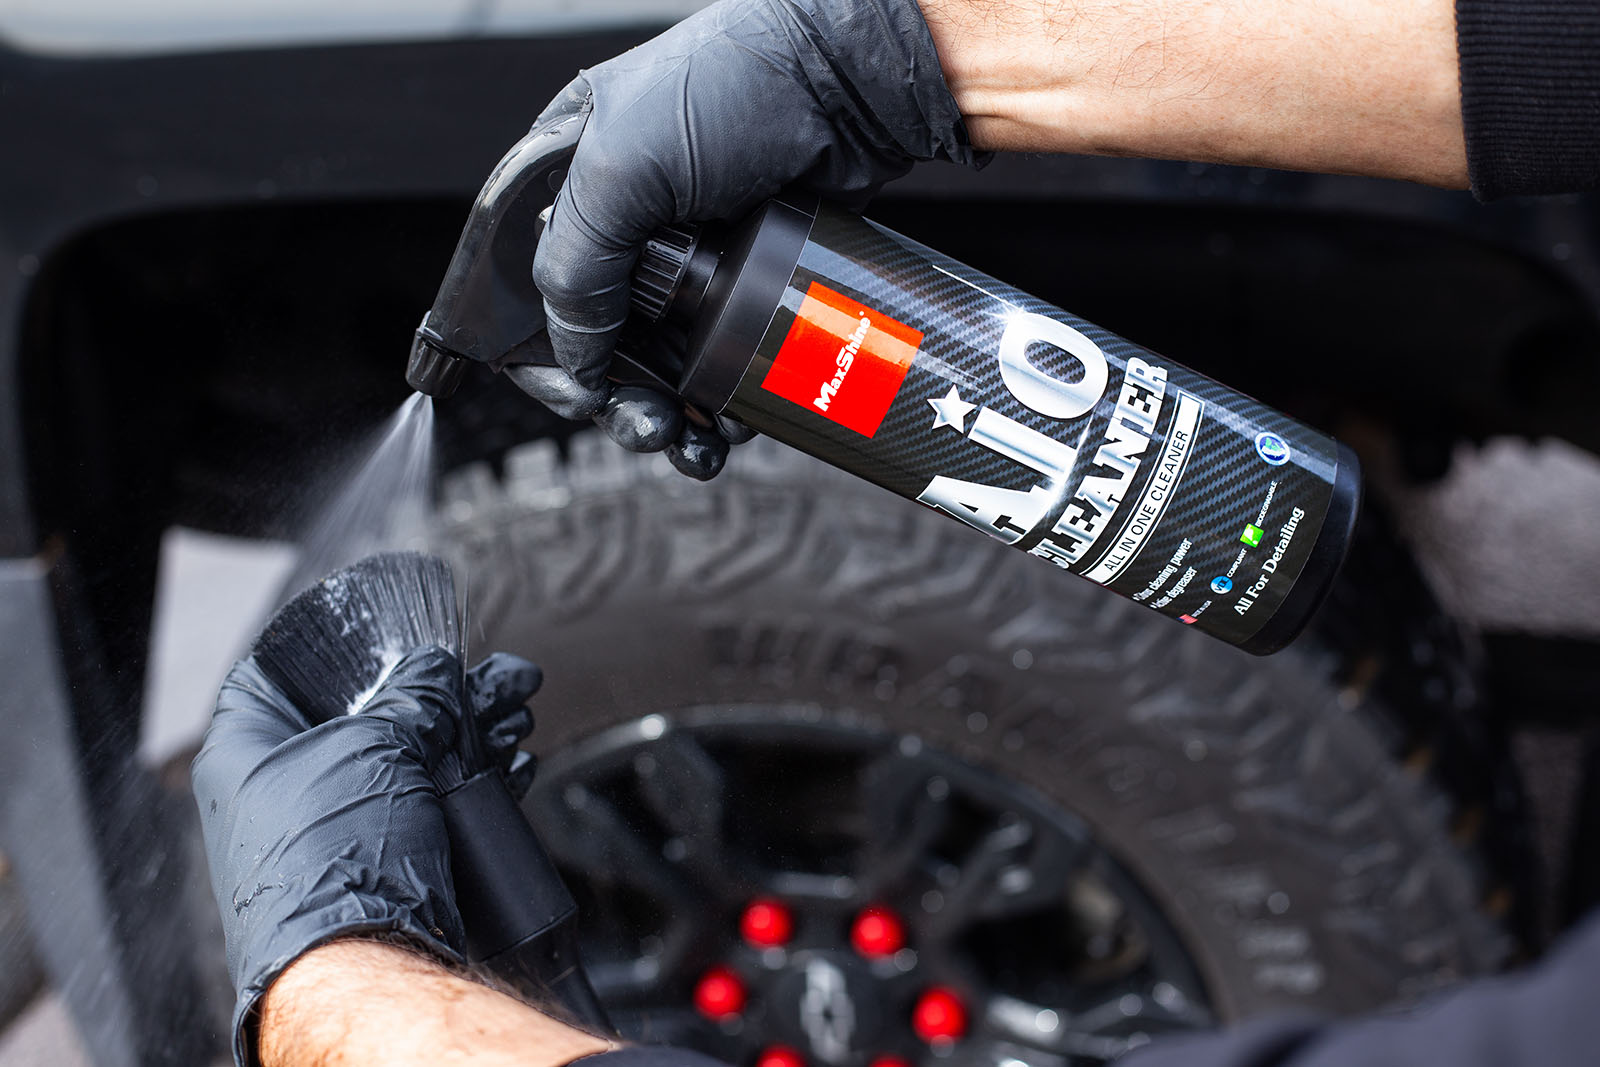 The Perfect All in One Cleaner for Detailing - A1O Cleaner